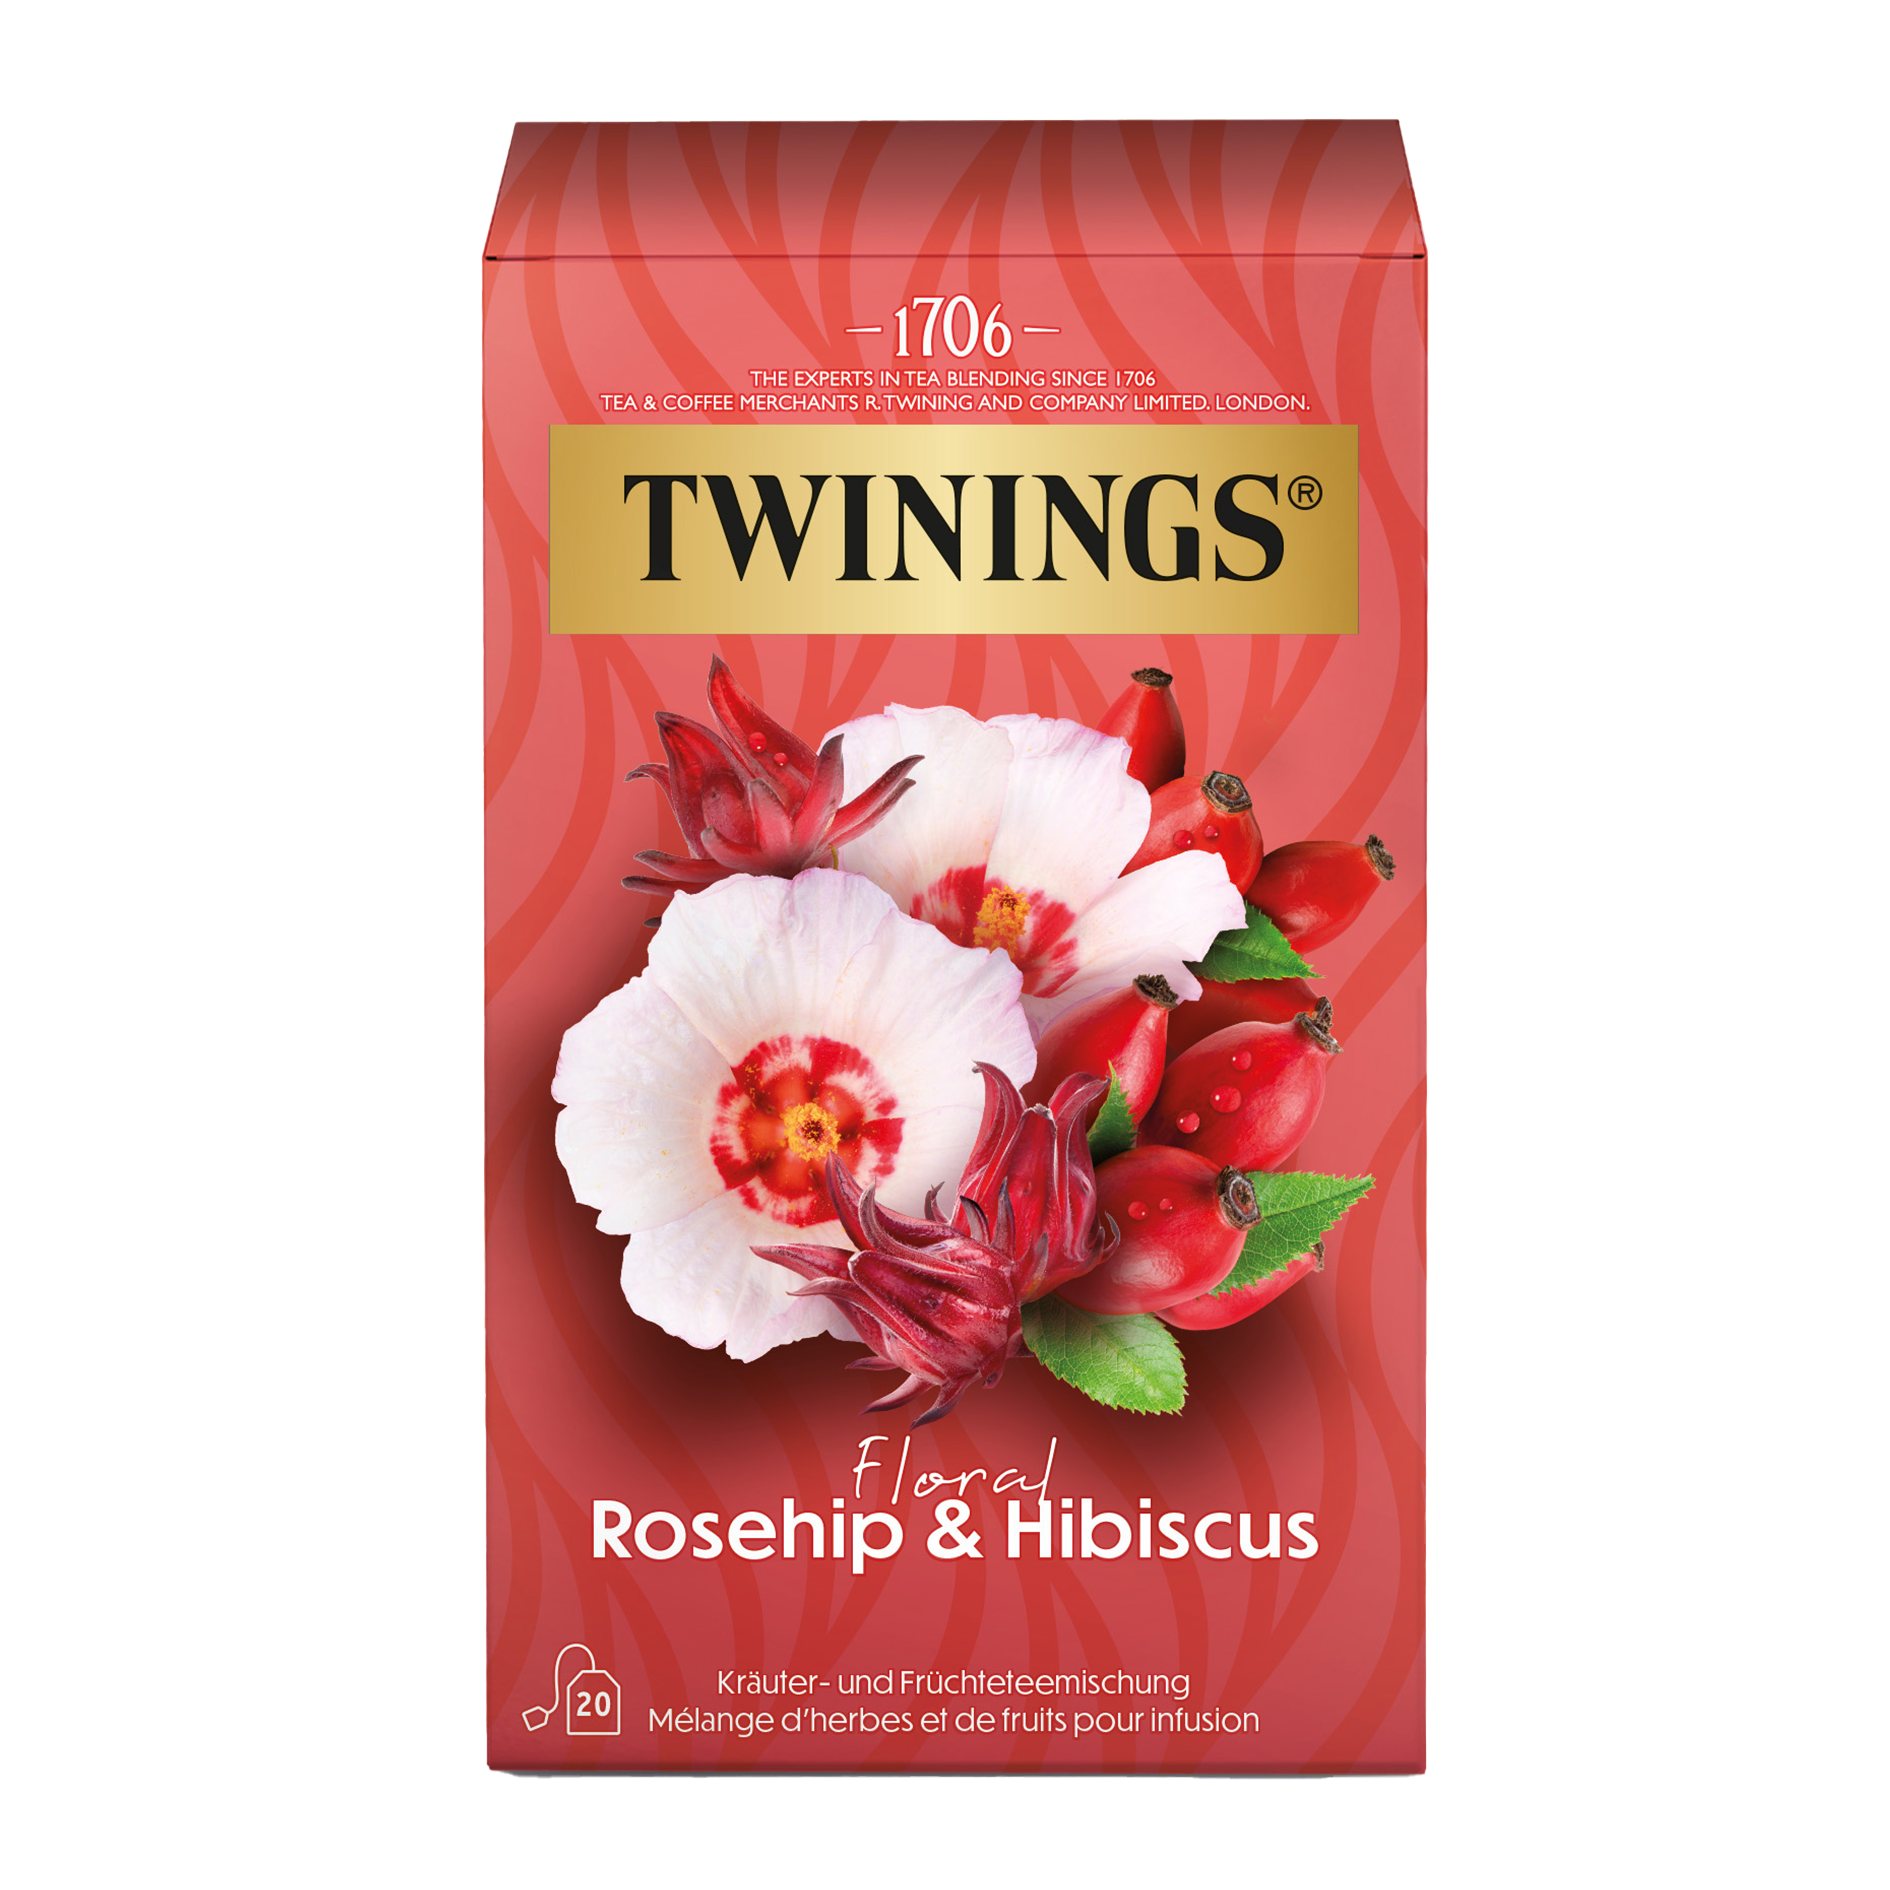  Rosehip & Hibiscus: l’infusion attrayante